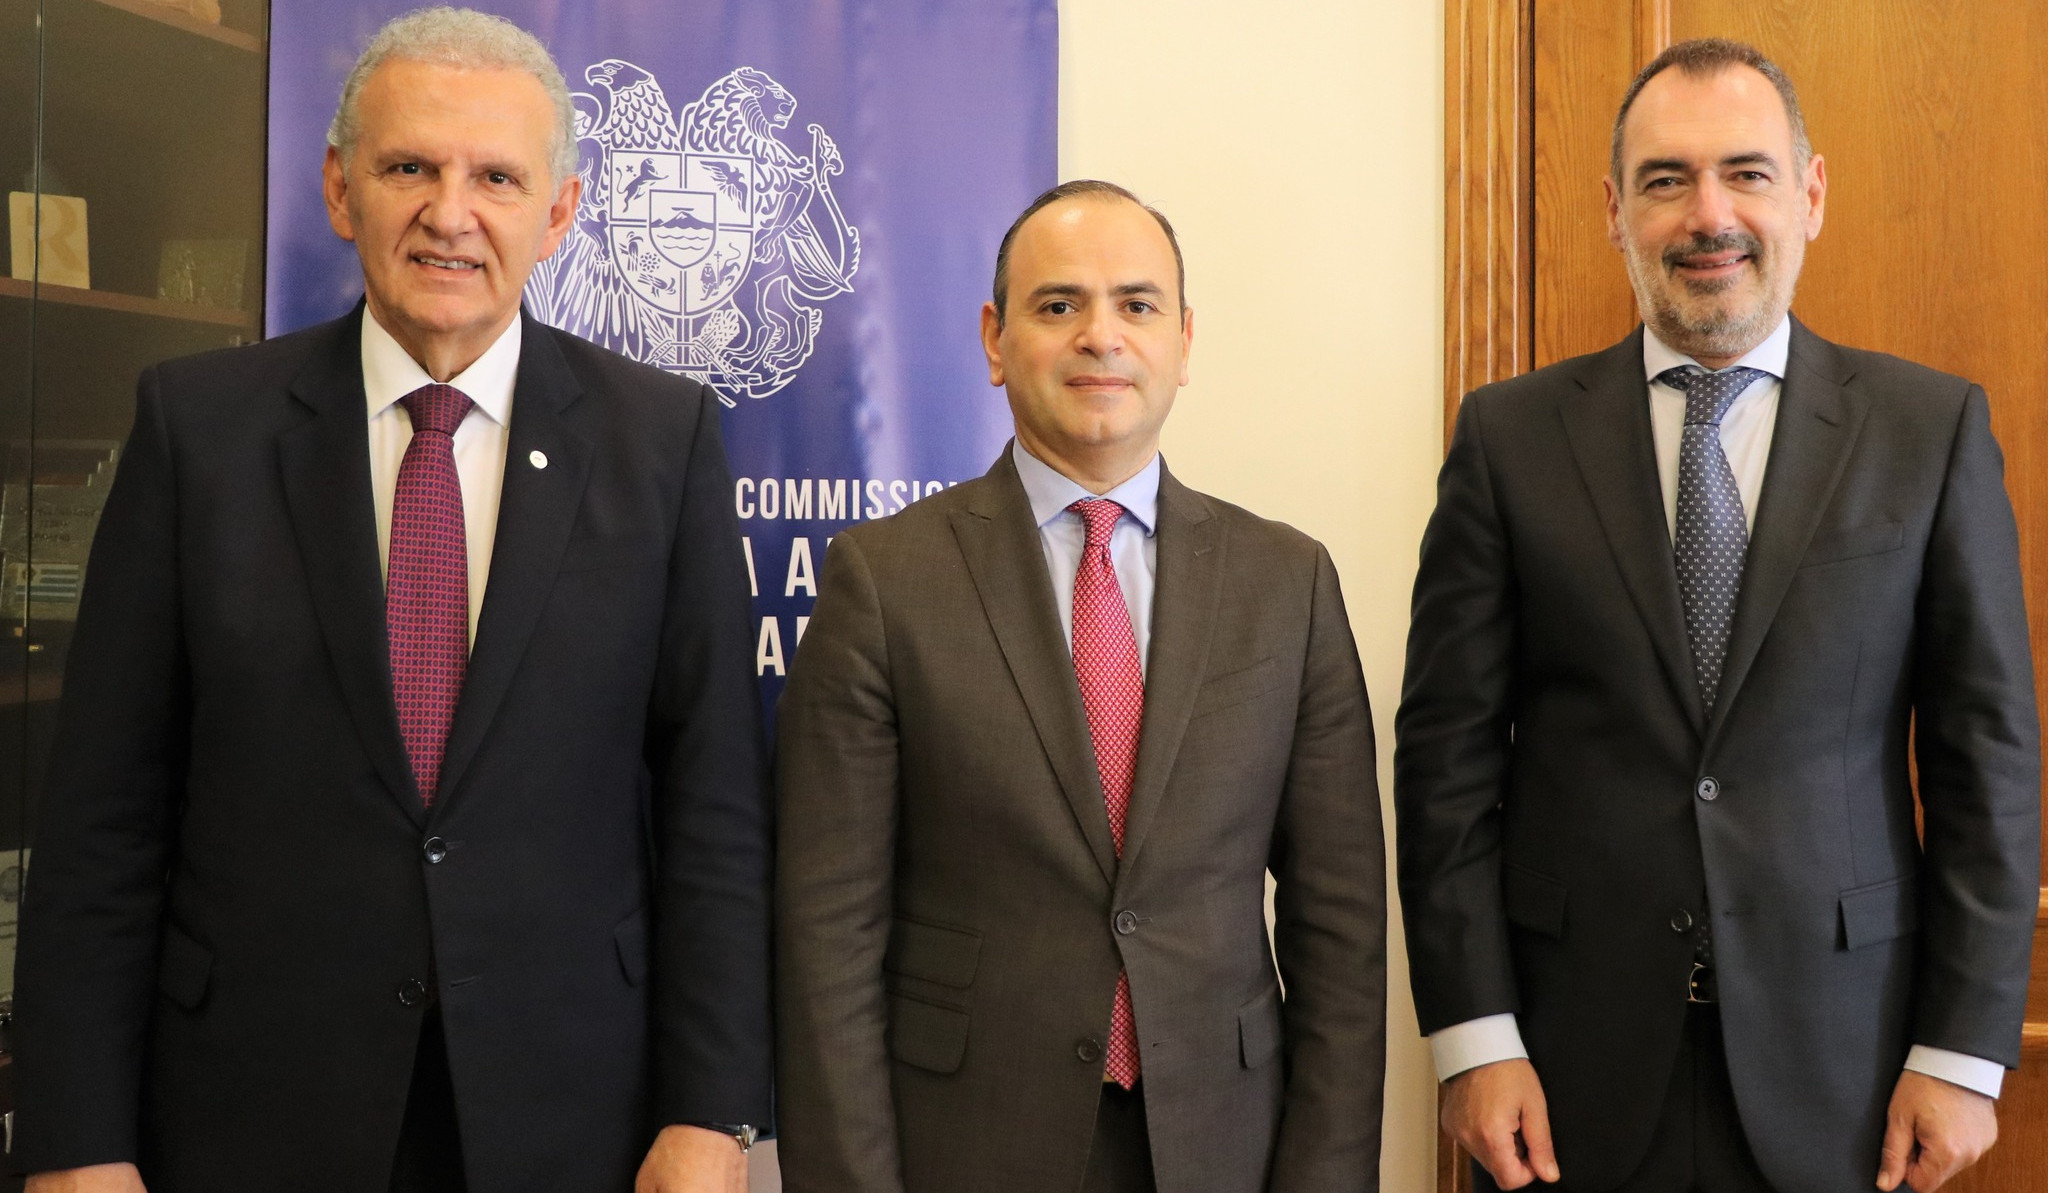 Issues related to implementation of provisions of trilateral memorandum on Armenia-Greece-Cyprus diaspora issues discussed